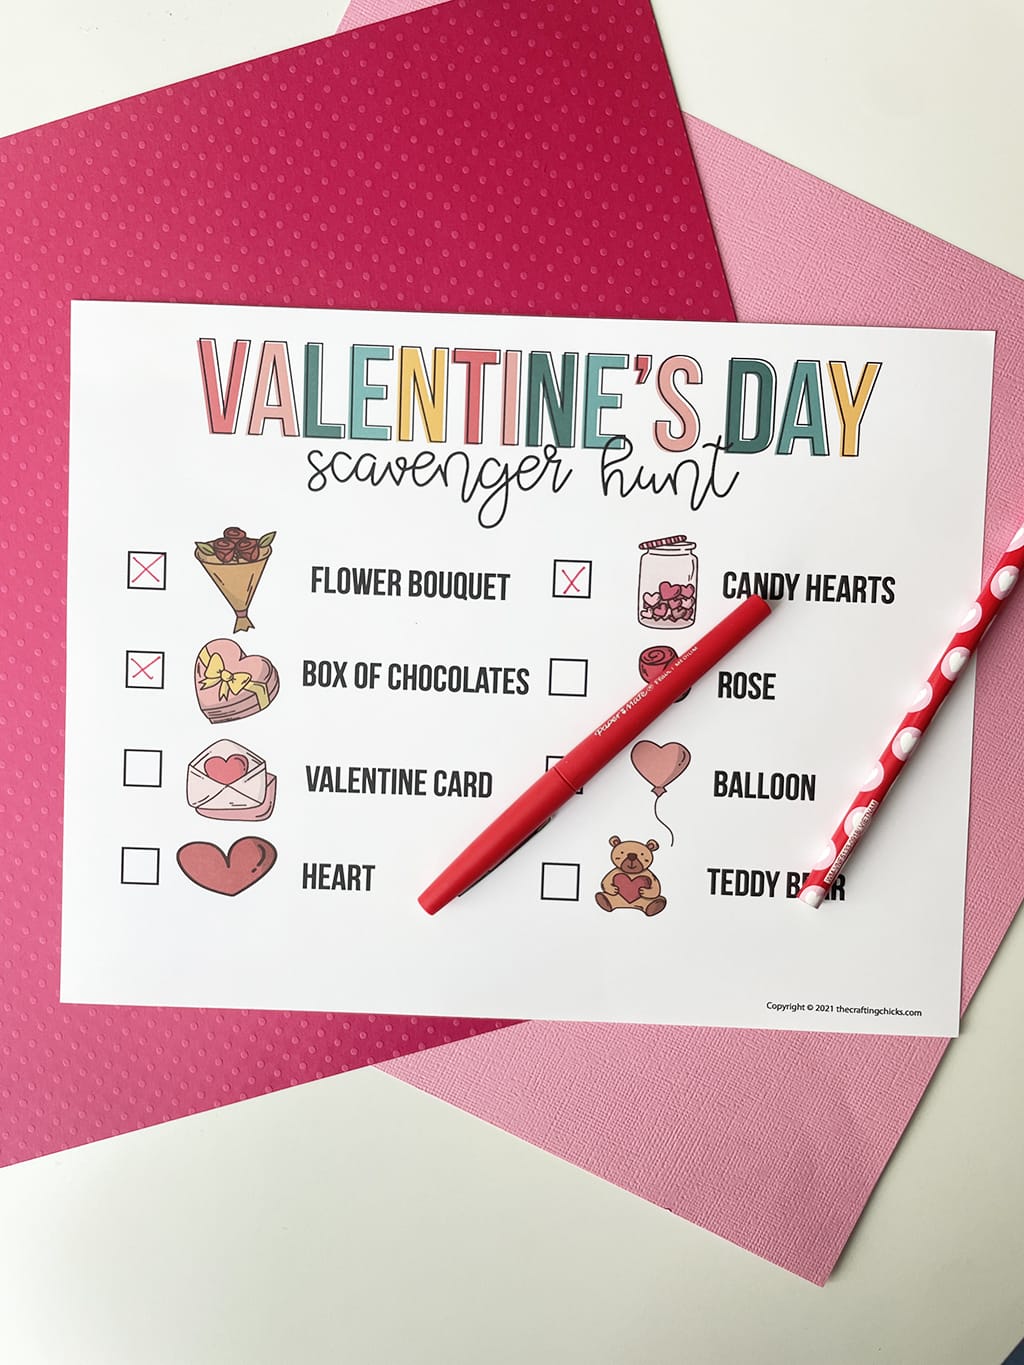 Valentines Day Scavenger Hunt Printable Game printed out and placed on a dark pink and light pink paper backdrop. With a red fineline marker that has written in some of the answers.